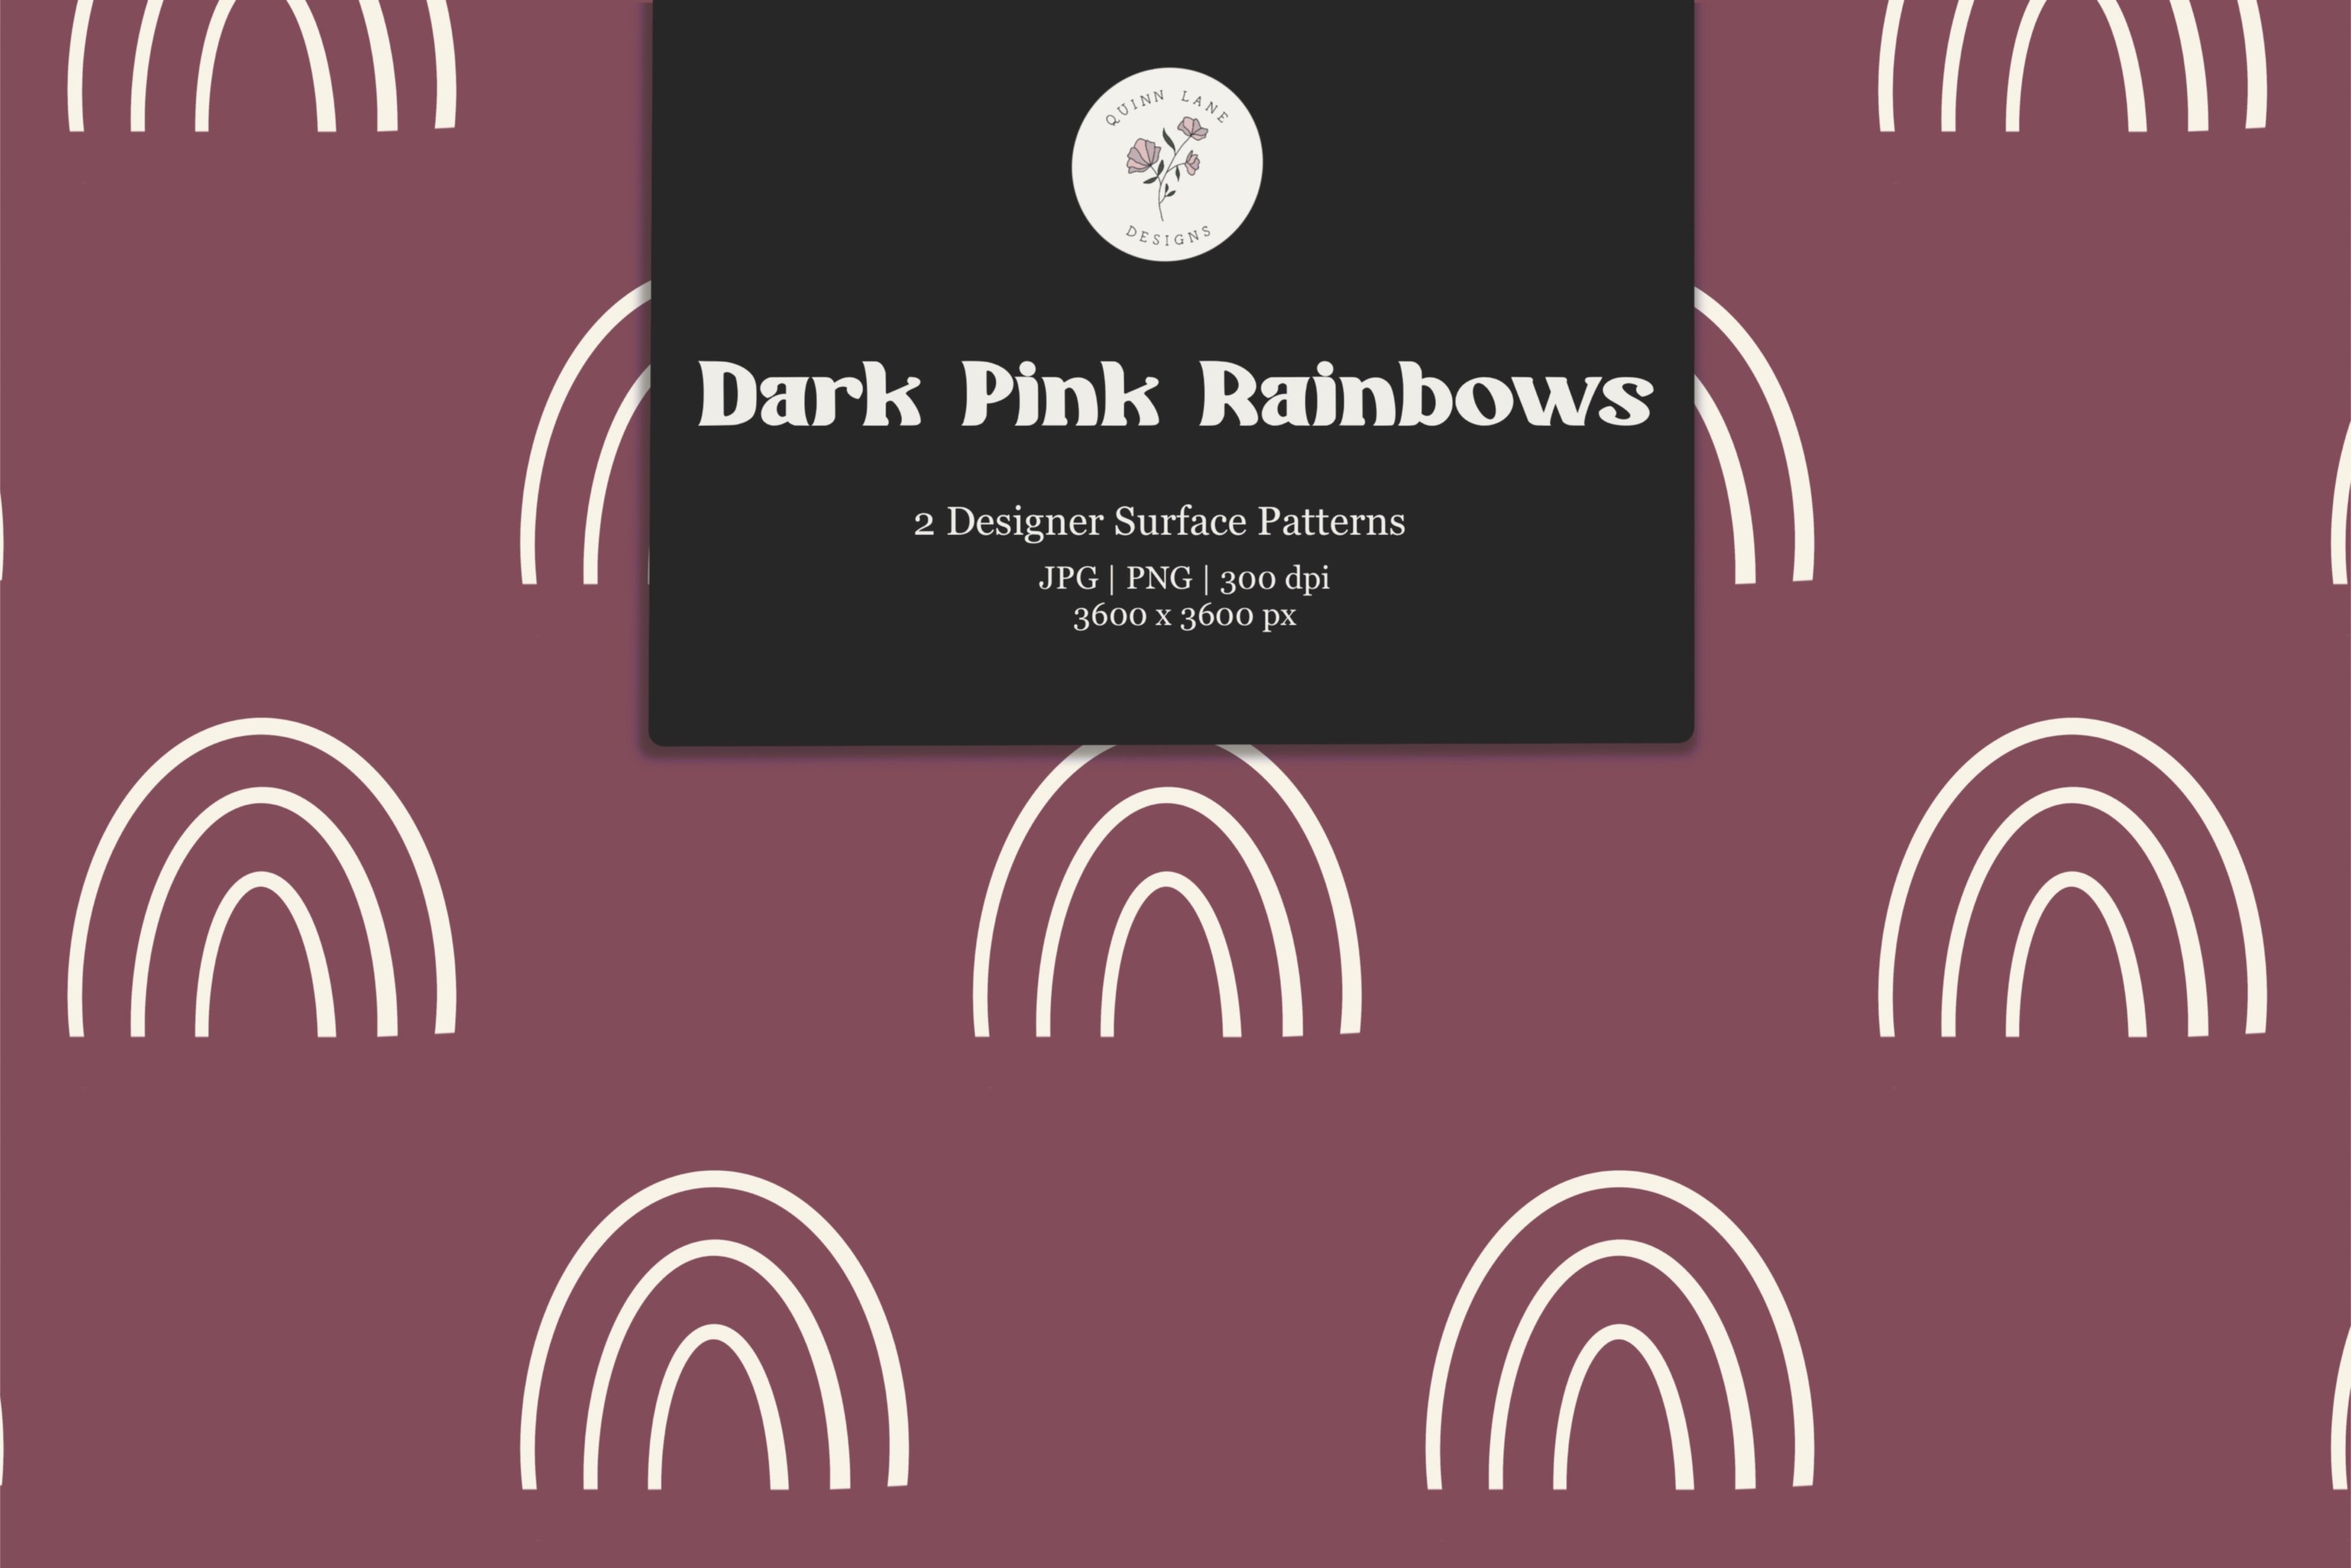 Dark Pink Rainbow Surface Patterns cover image.